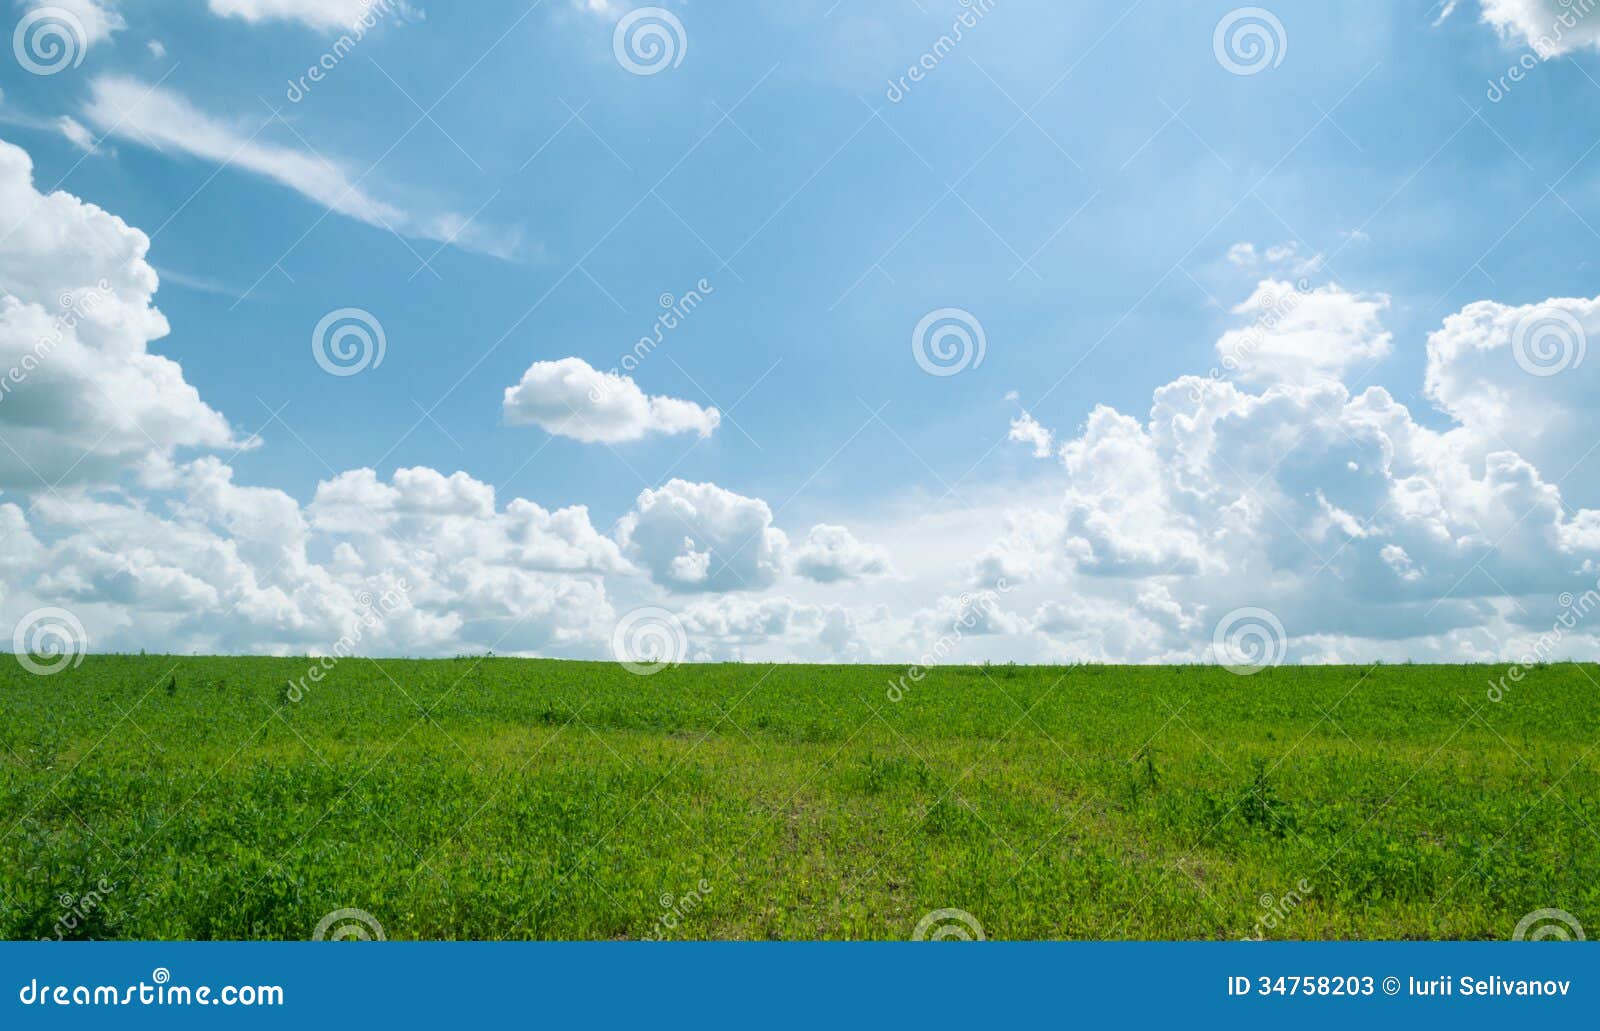 summer shining meadow blue sky fluffy clouds feel real sunlight bright white green 34758203